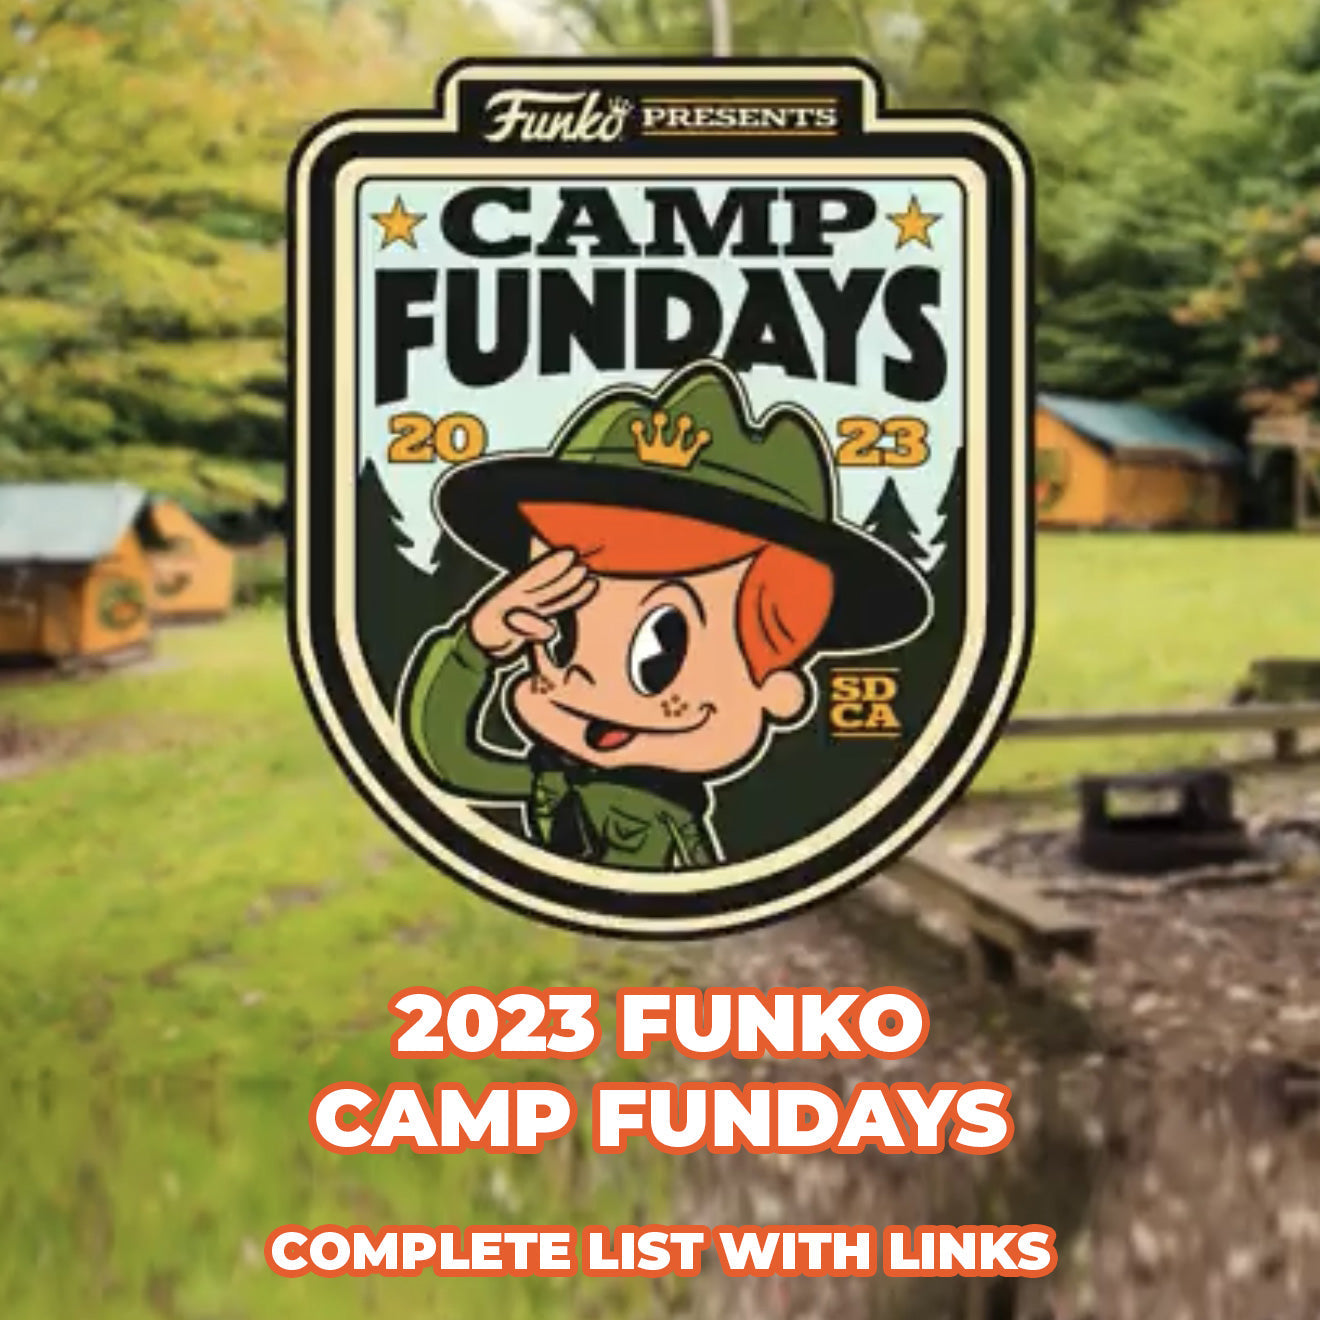 SDCC 2023 Funko Fundays, Box of Fun, Hall H & NFT Complete List with